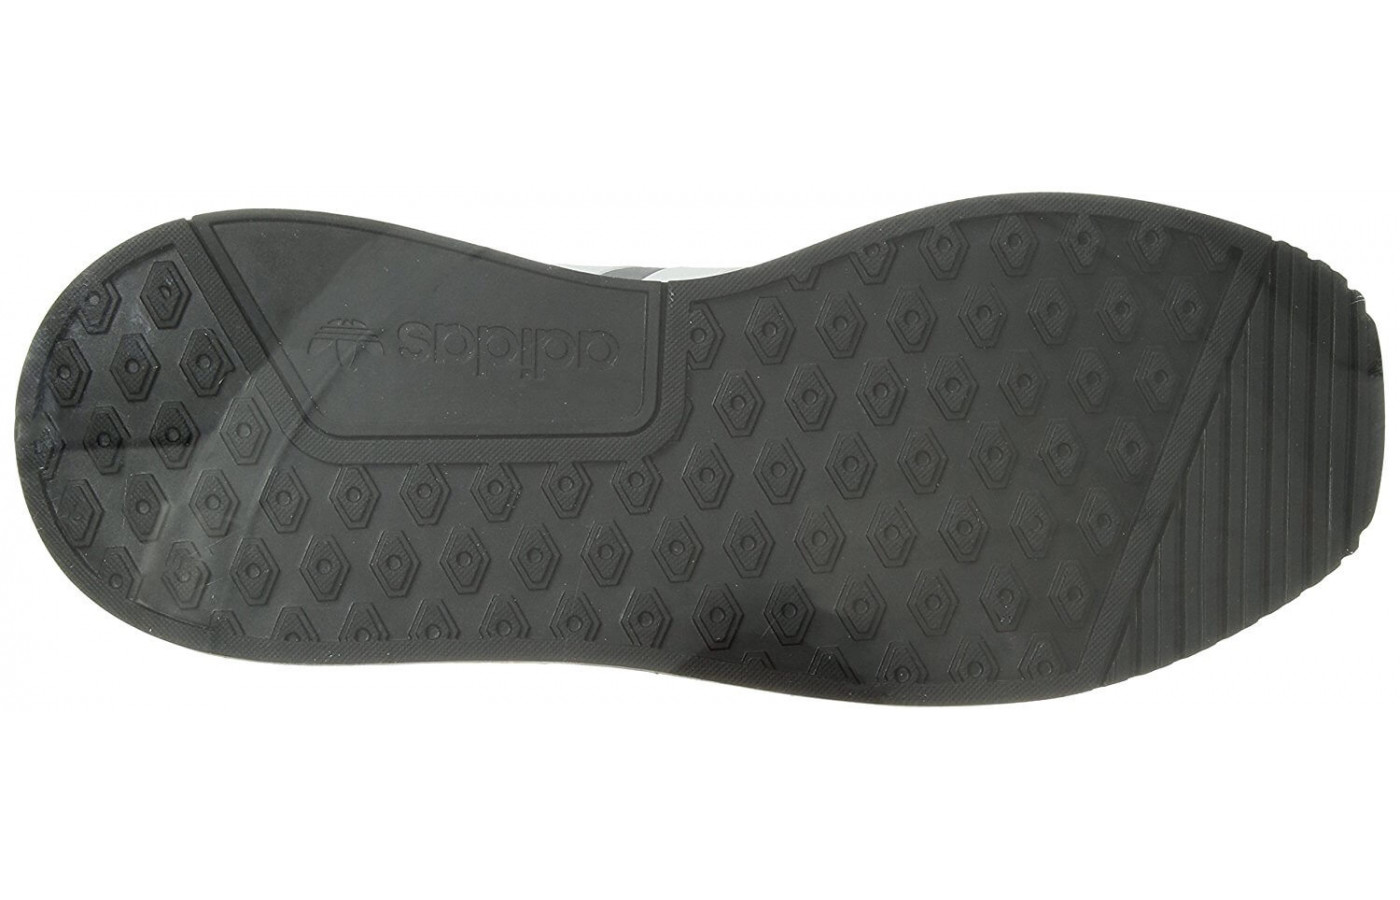 The Adidas X_PLR has a rubber outsole